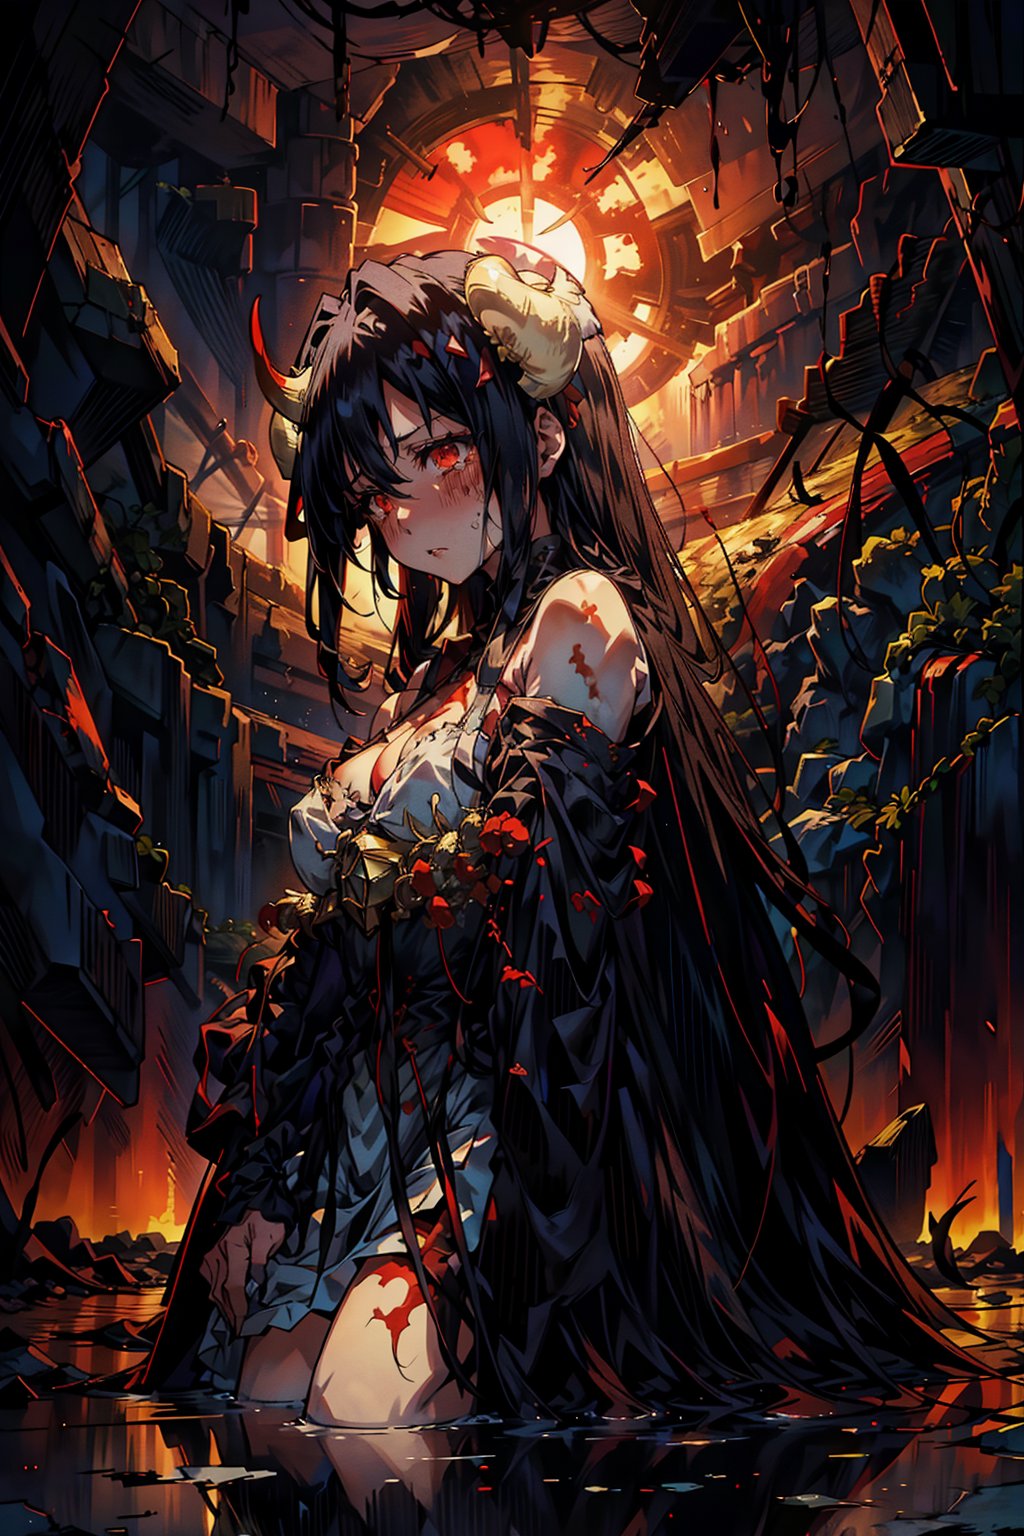 Albedo's anguished face, tears mixing with the blood stains on her dress, as the warm crimson hues of sunset illuminate the desolate battlefield. Her tattered kimono is proof of the great battle, showing her bare chest, in contrast to the turmoil within. The stillness conveys hope and comfort in the midst of destruction, Albedo's desperate expression a poignant counterpoint to the serene backdrop.,aanezuko,(Albedo),albedo \(overlord\)